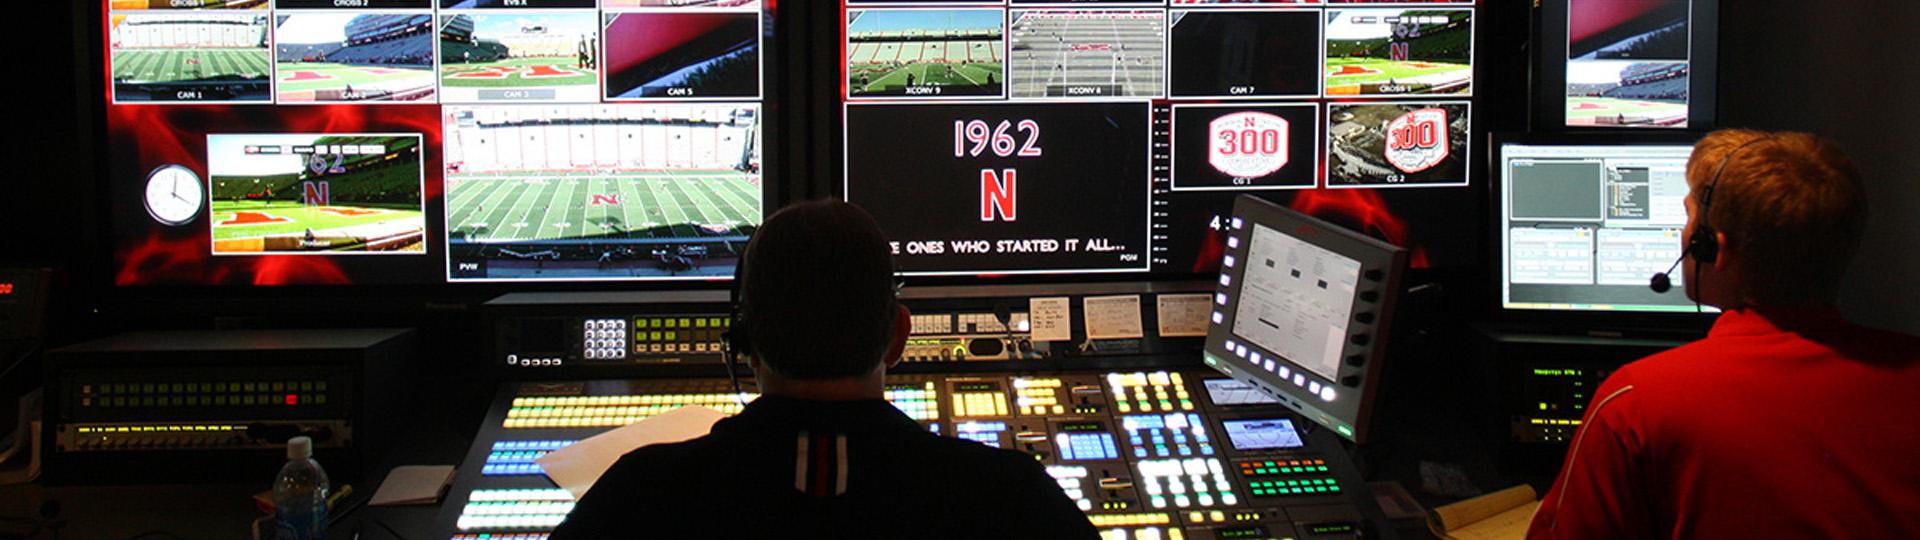 Production, presentation & IPTV solutions for sports